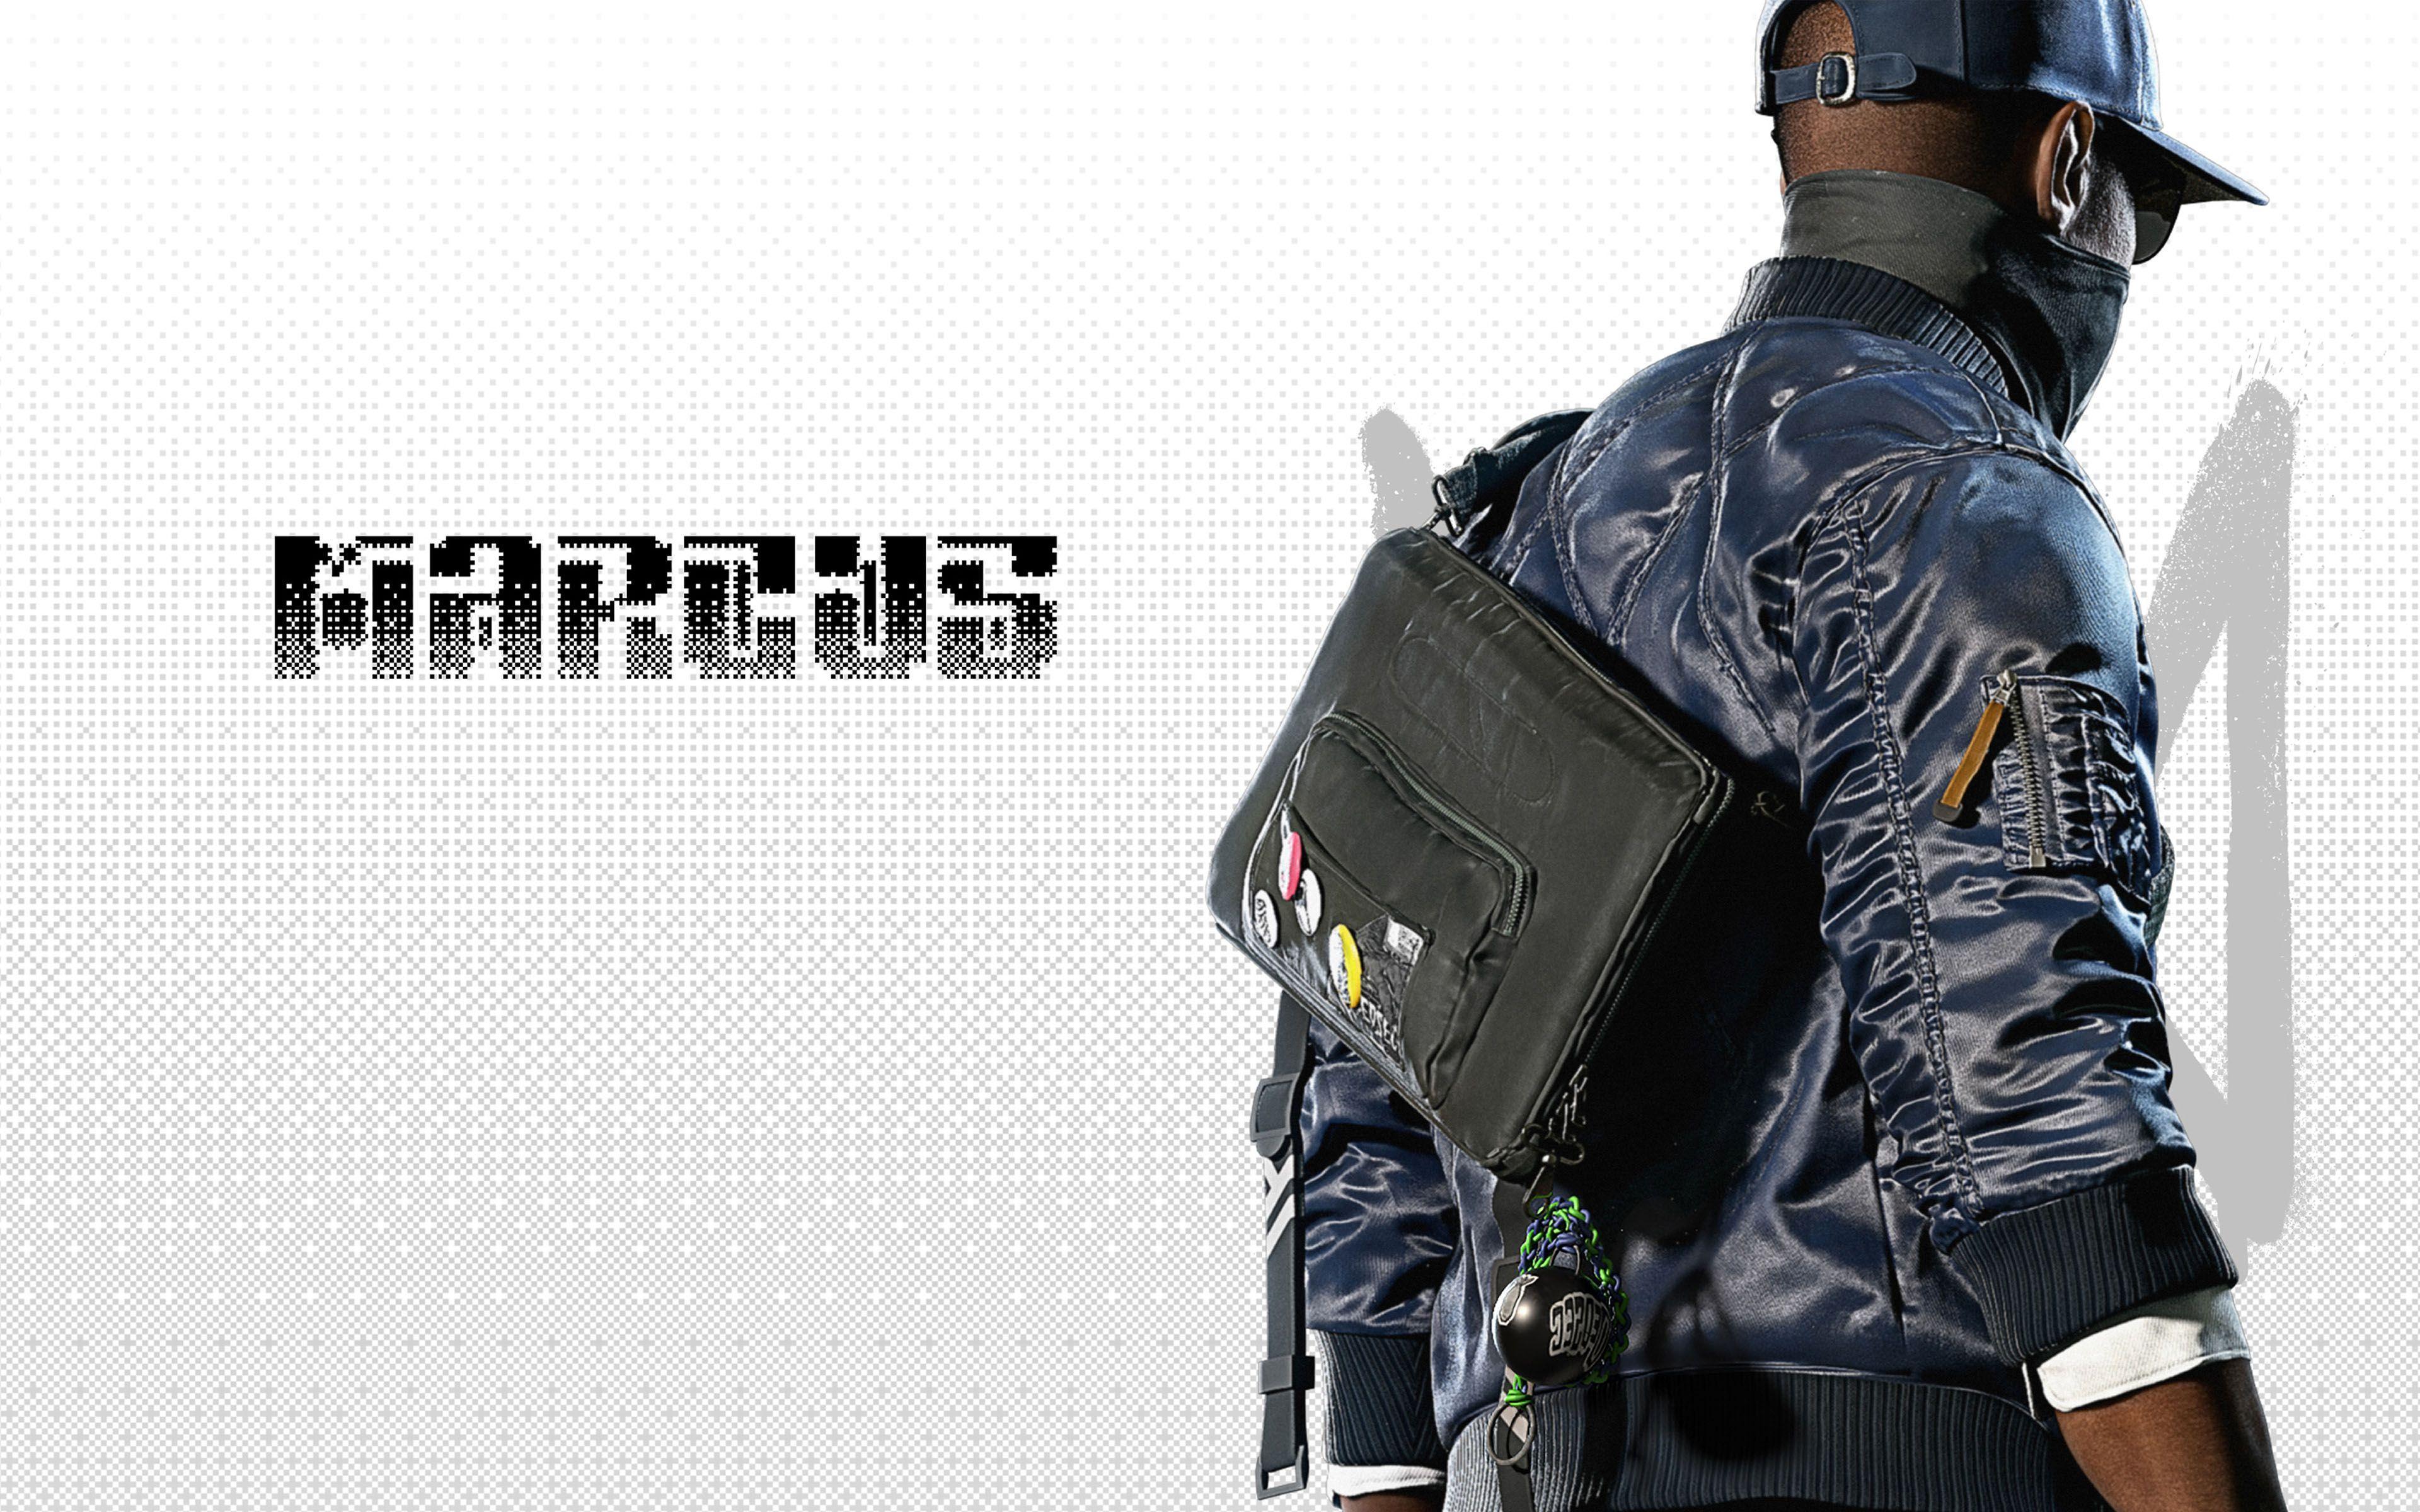 Marcus Holloway Watch Dogs 2 Game Wallpaper